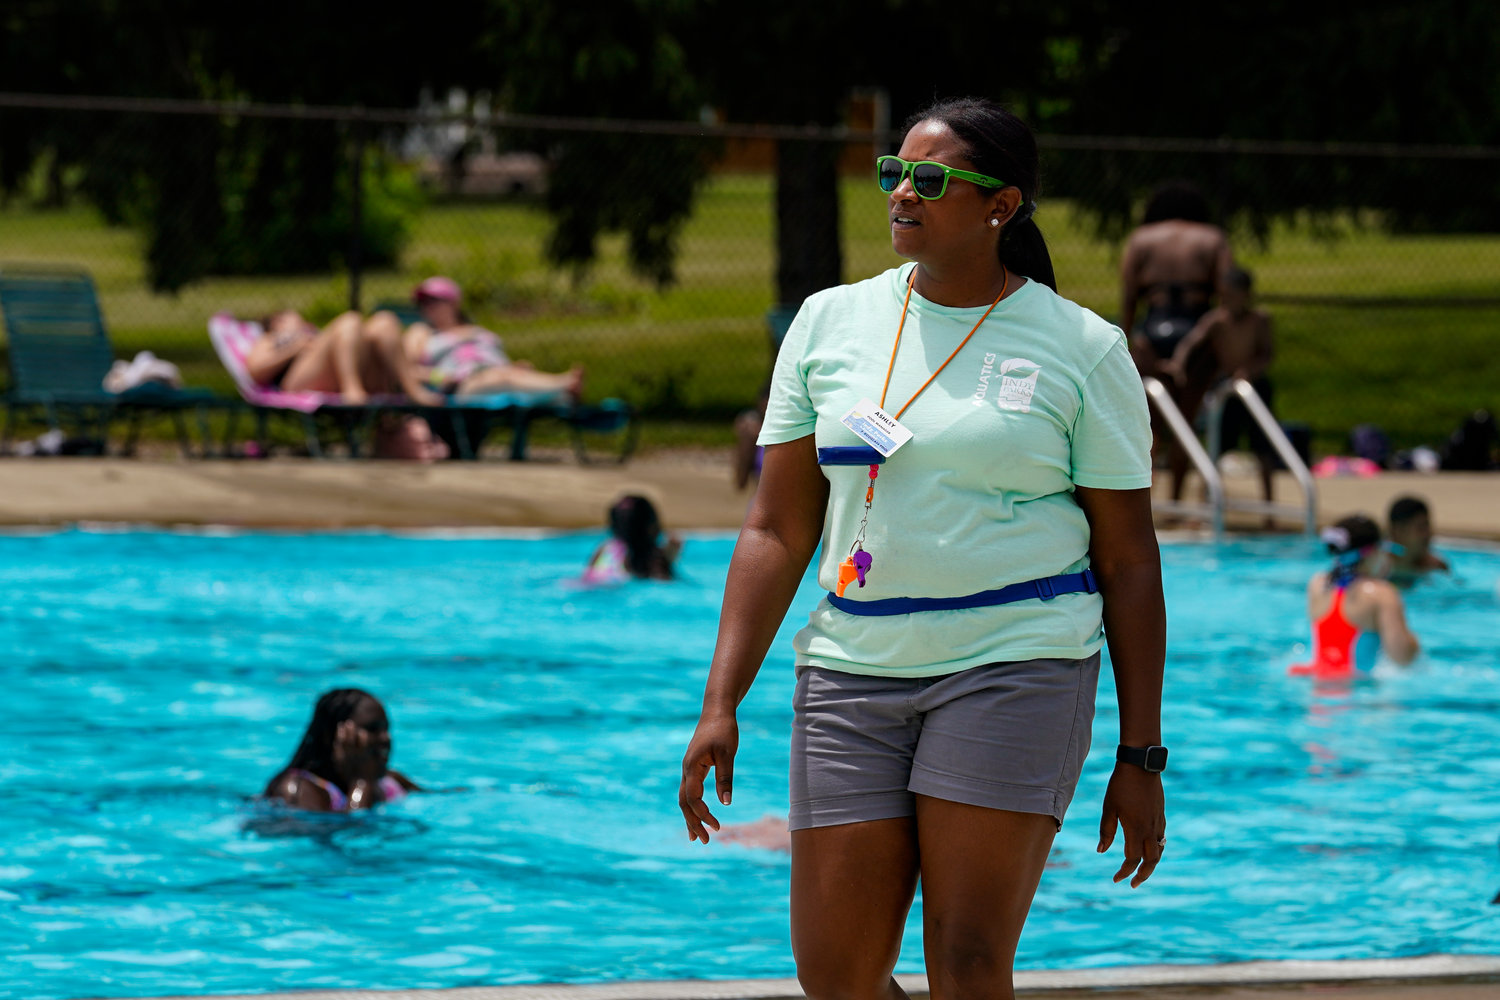 Pool manager Ashley Ford walks the pool deck during a at the Douglass Park pool in Indianapolis, Friday, June 17, 2022. Indianapolis typically fills 17 pools each year, but with a national lifeguard shortage exacerbated by the COVID-19 pandemic, just five are open this summer. The American Lifeguard Association estimates one-third of pools in the United States are impacted by the shortage. (AP Photo/Michael Conroy)